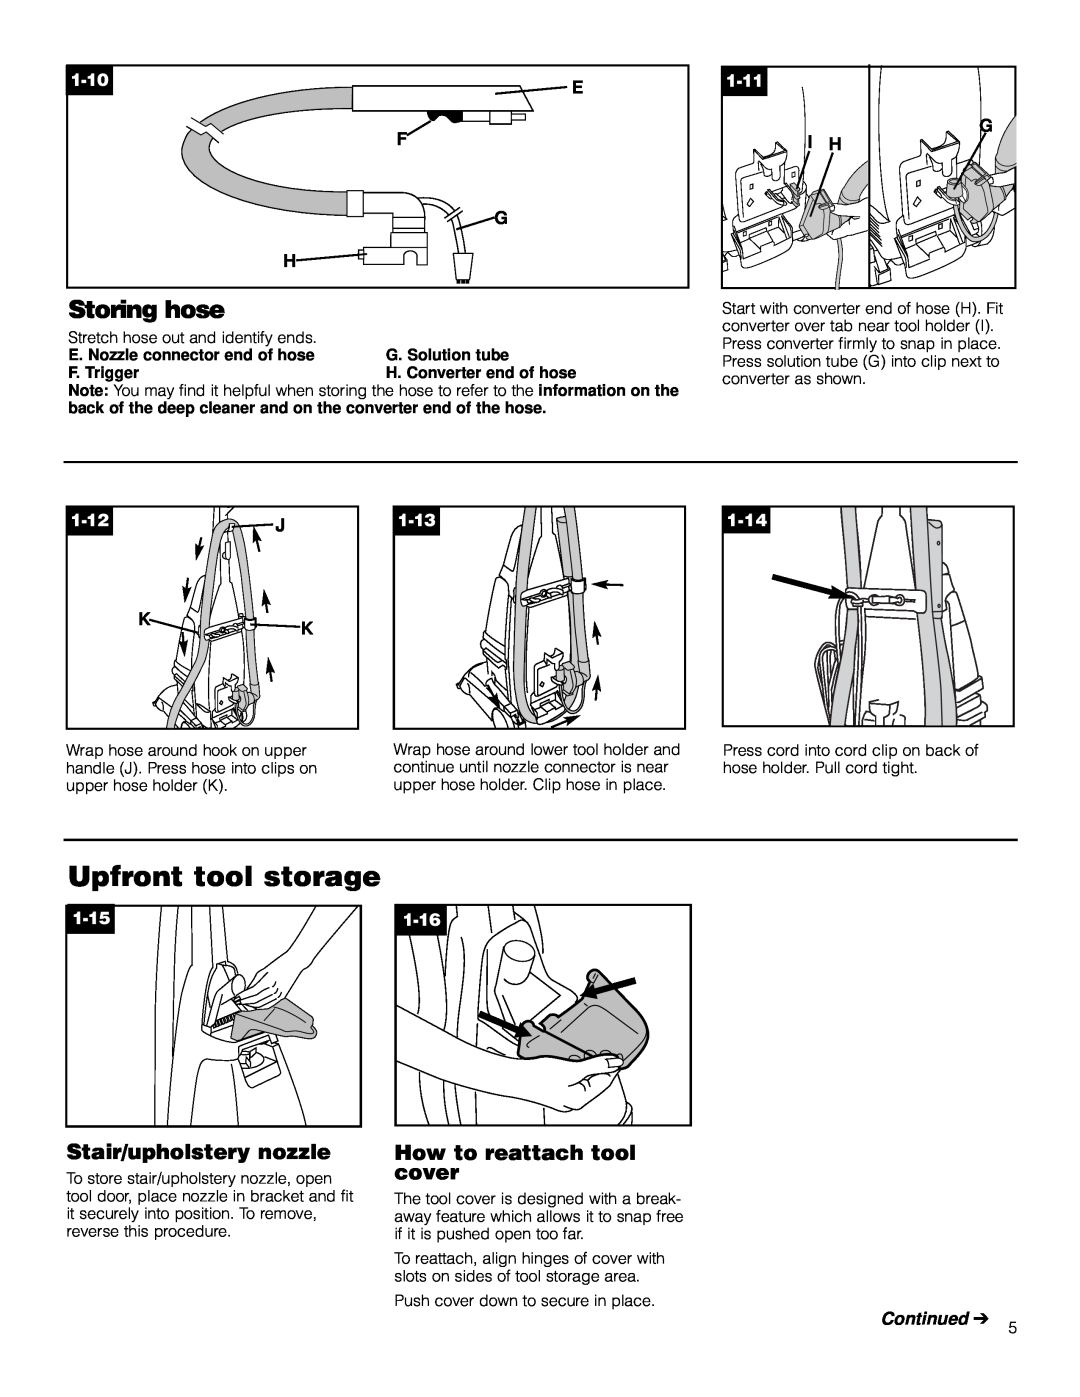 Hoover F5906900 owner manual Upfront tool storage, Storing hose, 1-10, 1-11, 1-12, 1-13, 1-14, 1-15, 1-16, Continued 